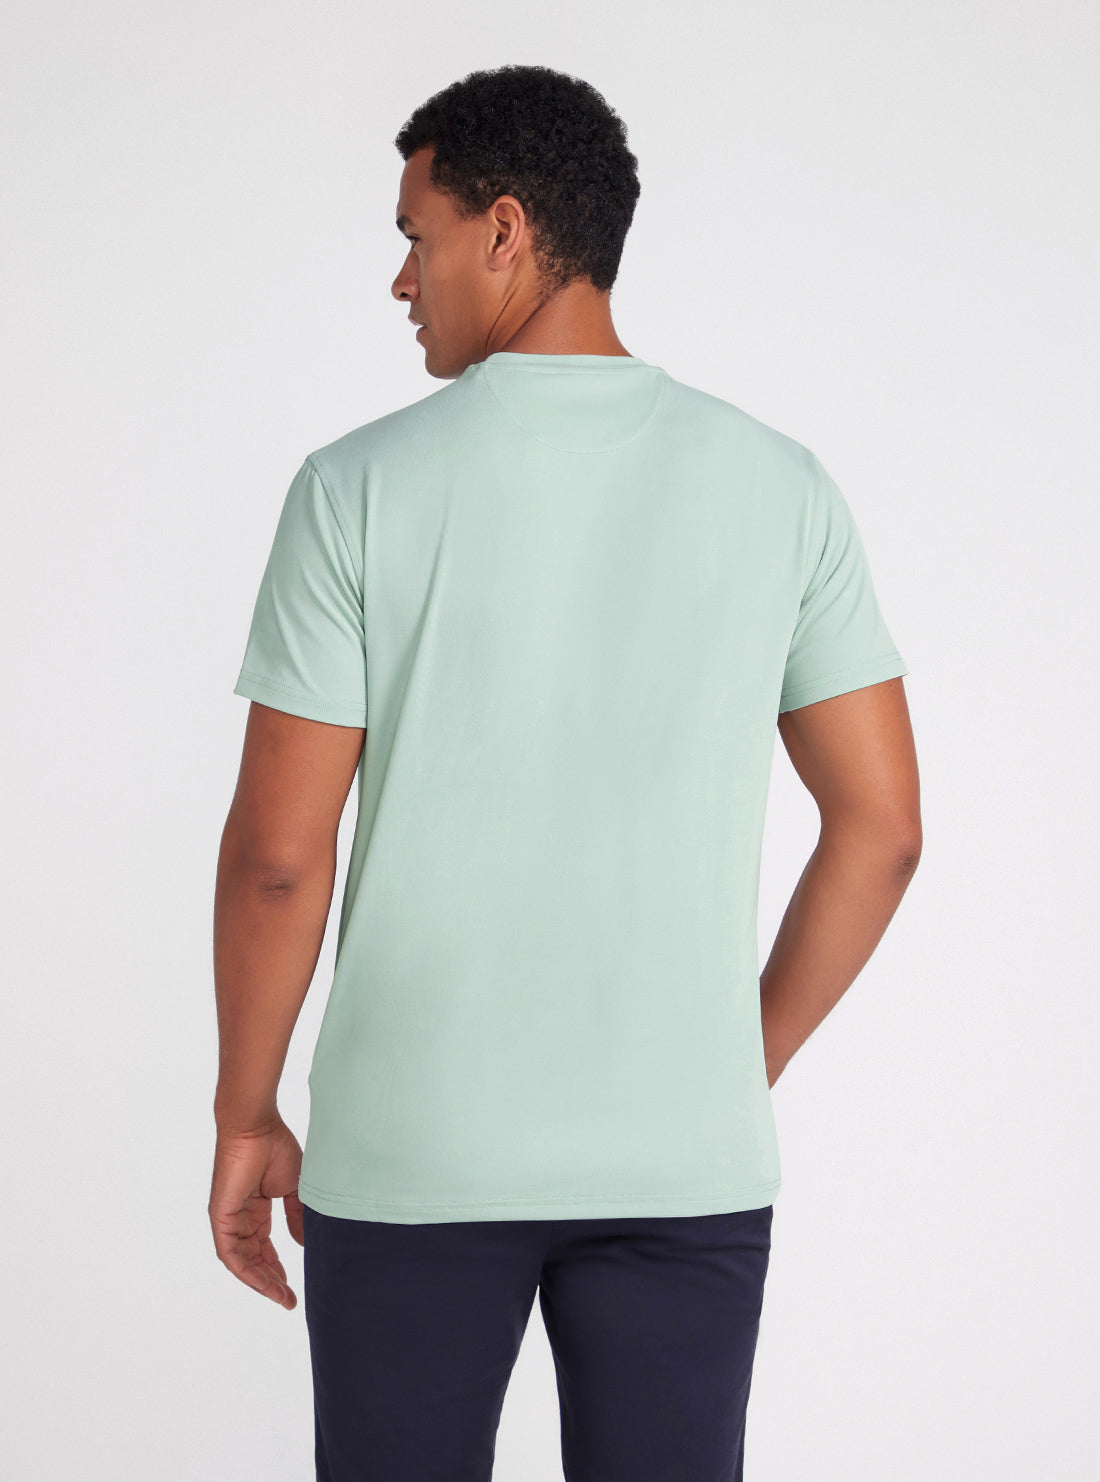 Mint Green Smooth T-Shirt | GUESS Men's Apparel | back view